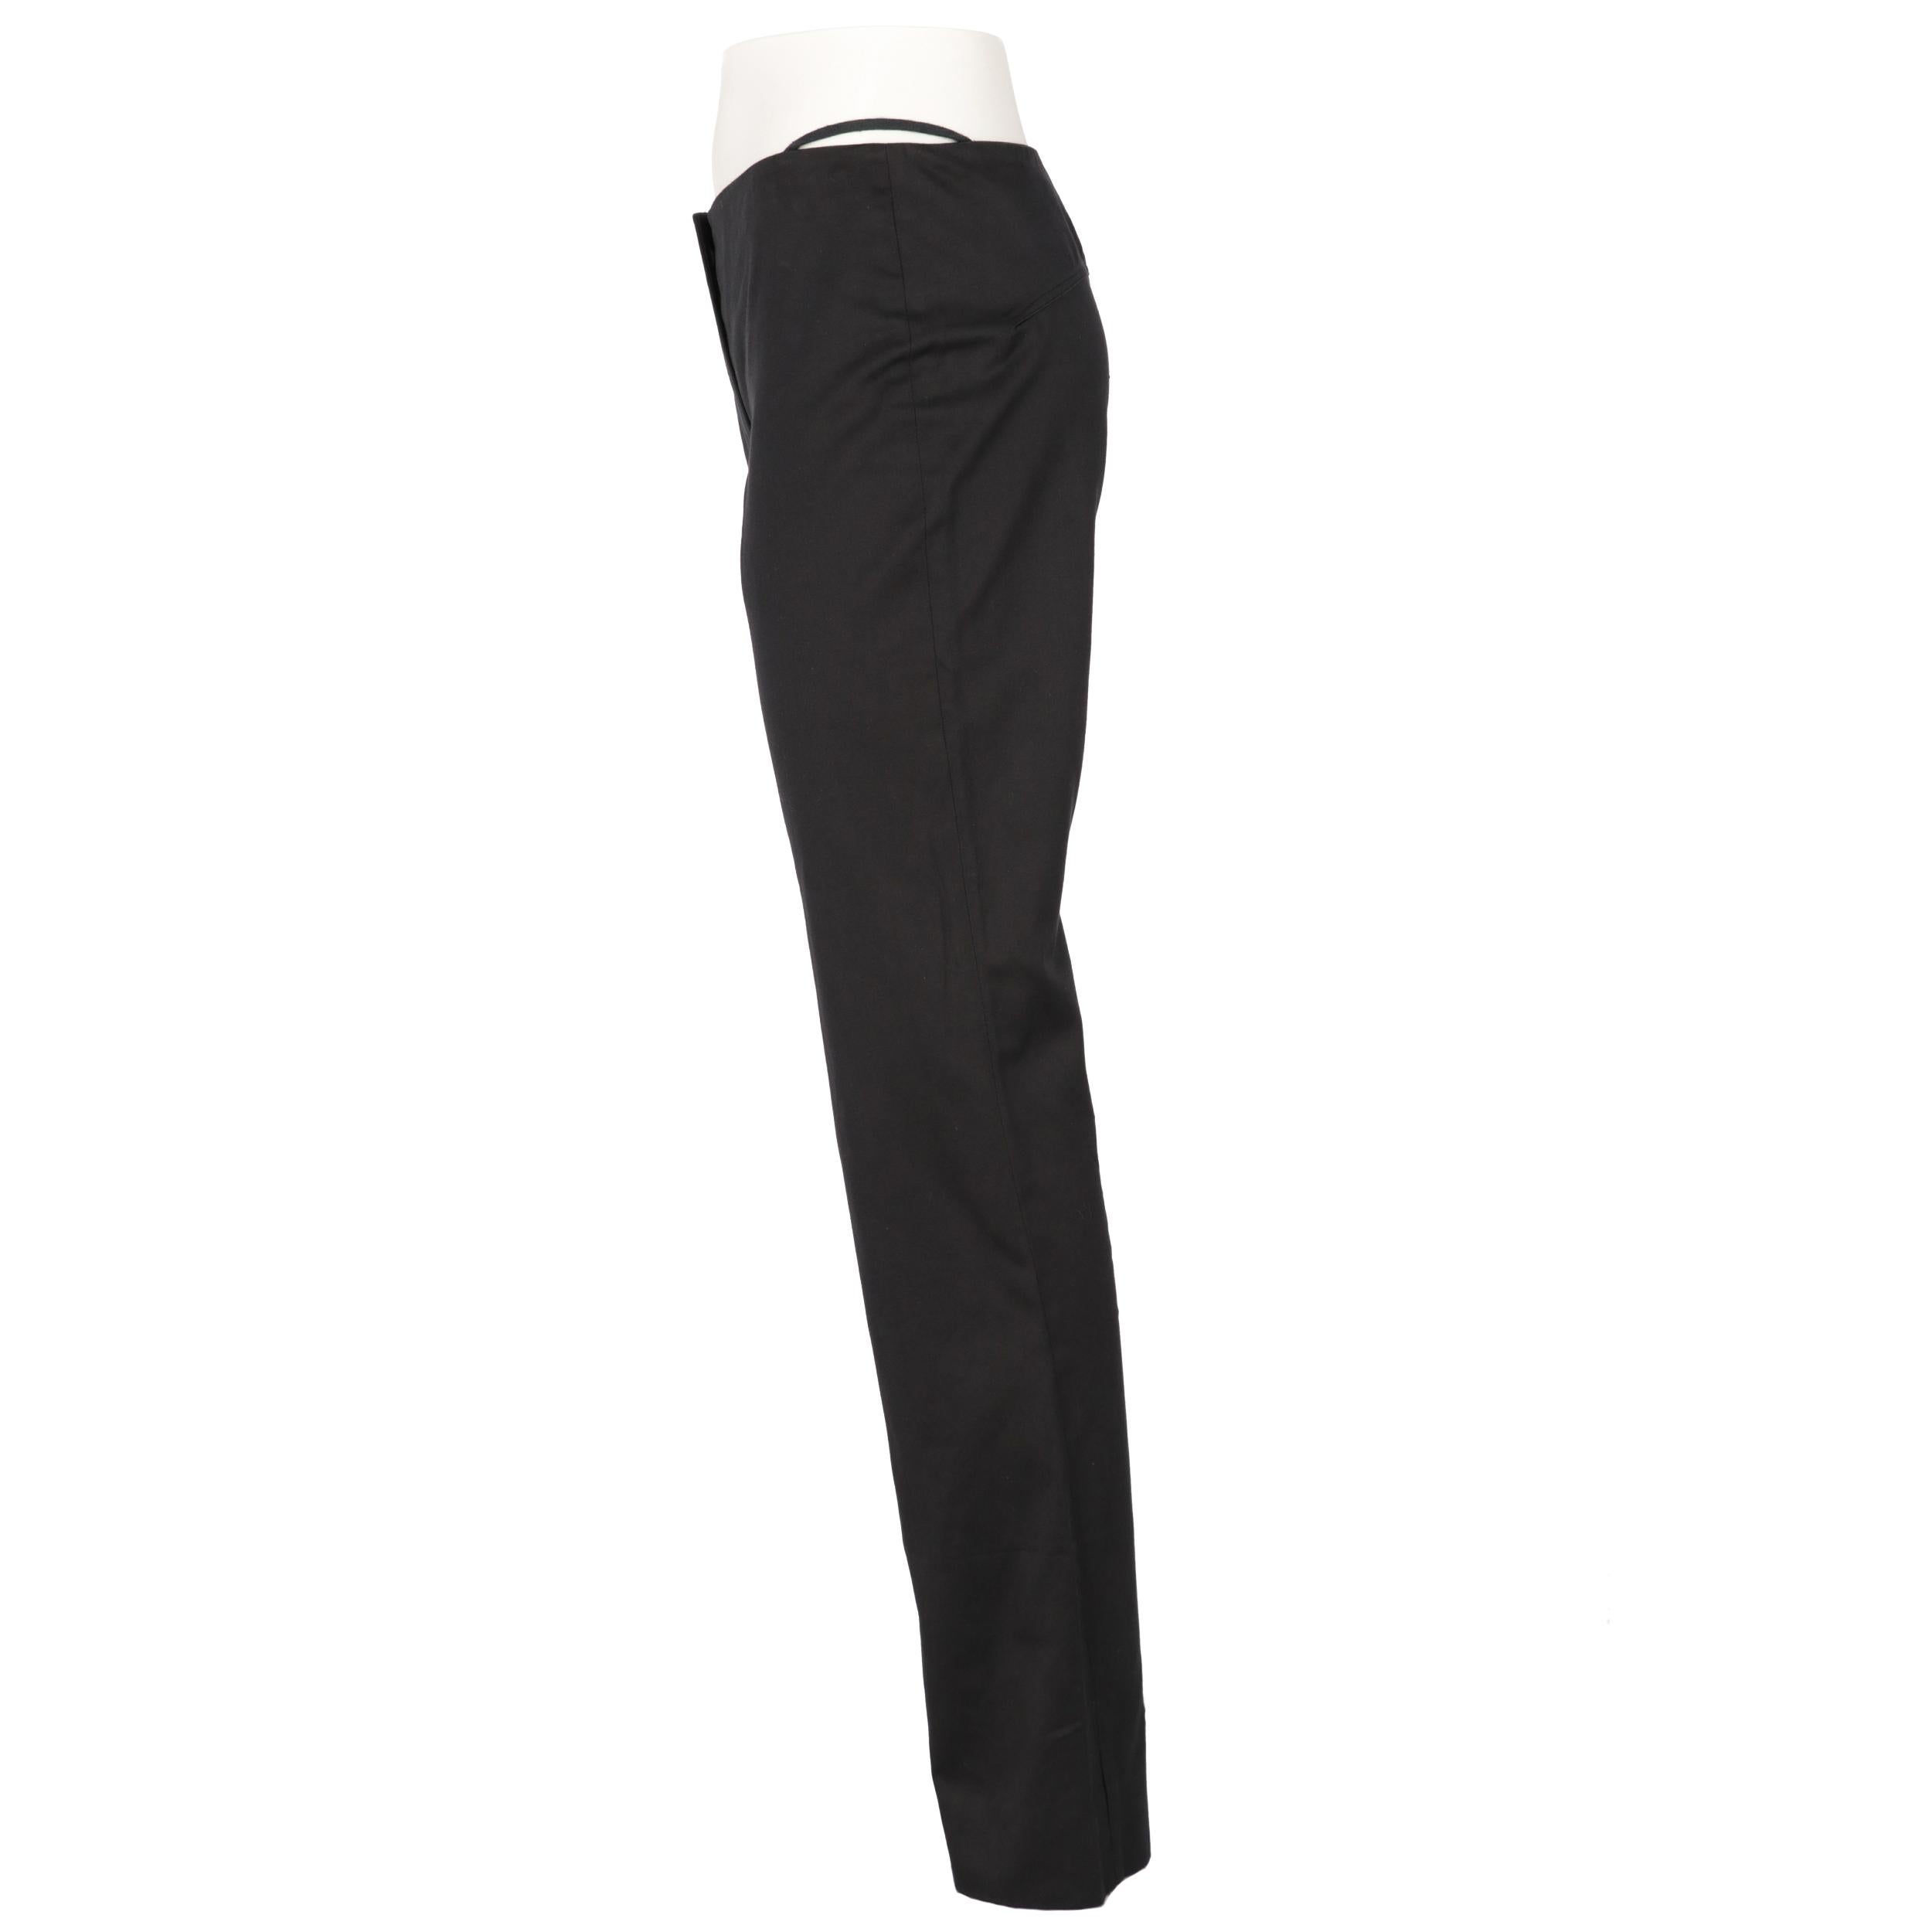 Helmut Lang black cotton trousers. Mid-rise model, straight cut and visible side waist details. Front closure with hook and buttons.

The product has some halos on the fabric, as shown in the pictures.
Years: 90s

Made in Italy

Size: 40 IT

Flat